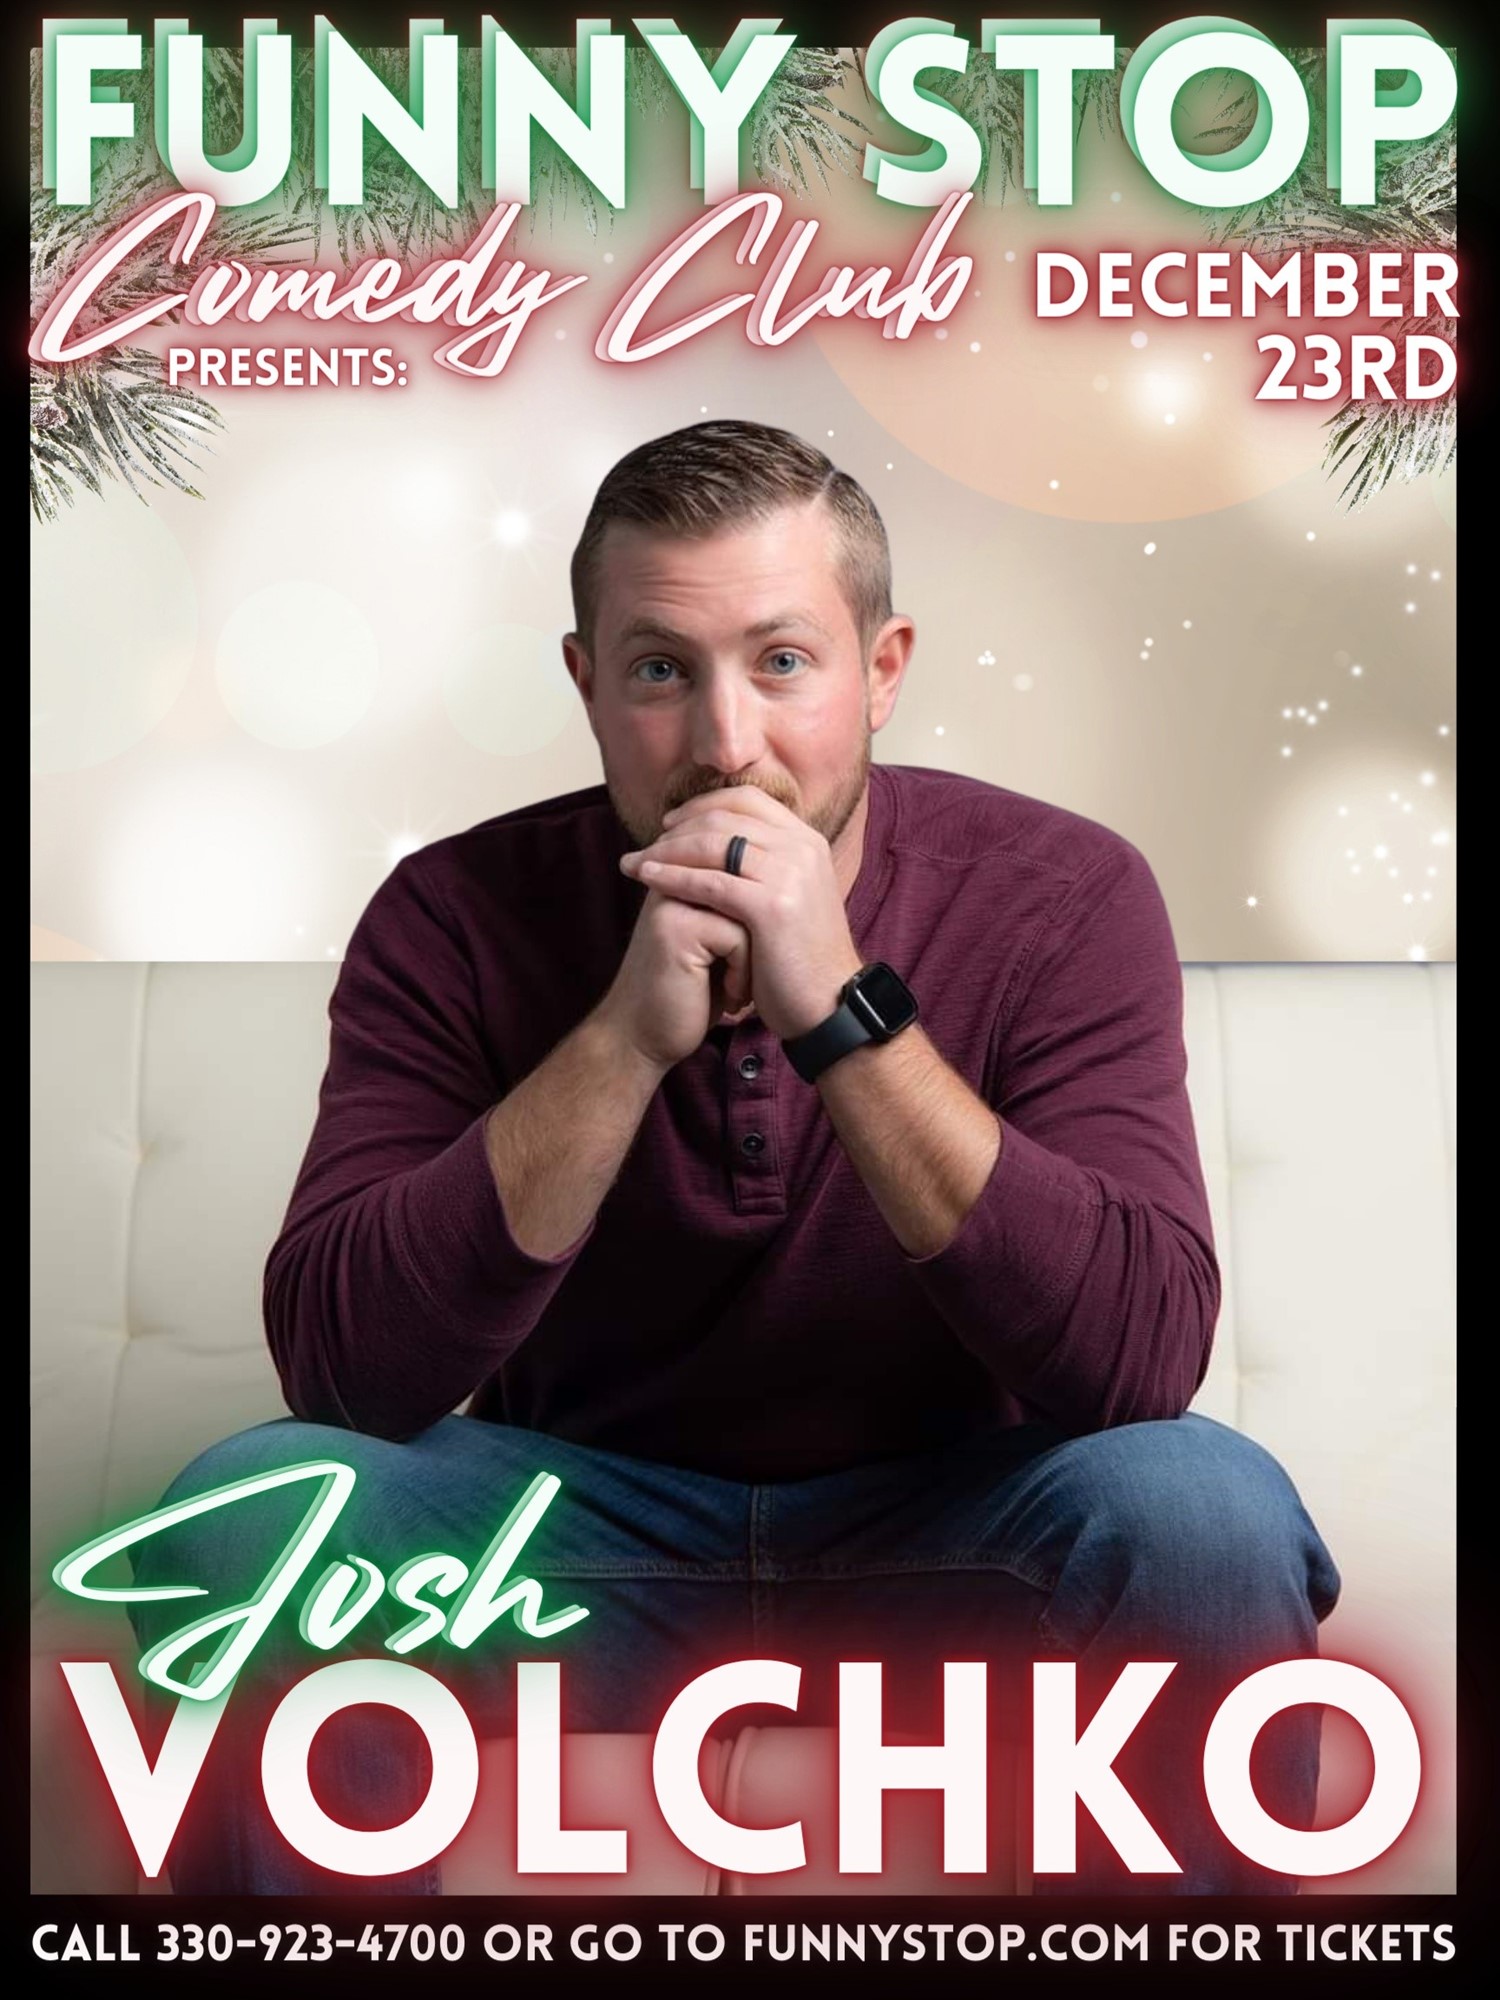 Josh Volchko 7:20pm Show Funny Stop Comedy Club on Dec 23, 19:20@Funny Stop Comedy Club - Buy tickets and Get information on Funny Stop funnystop.online